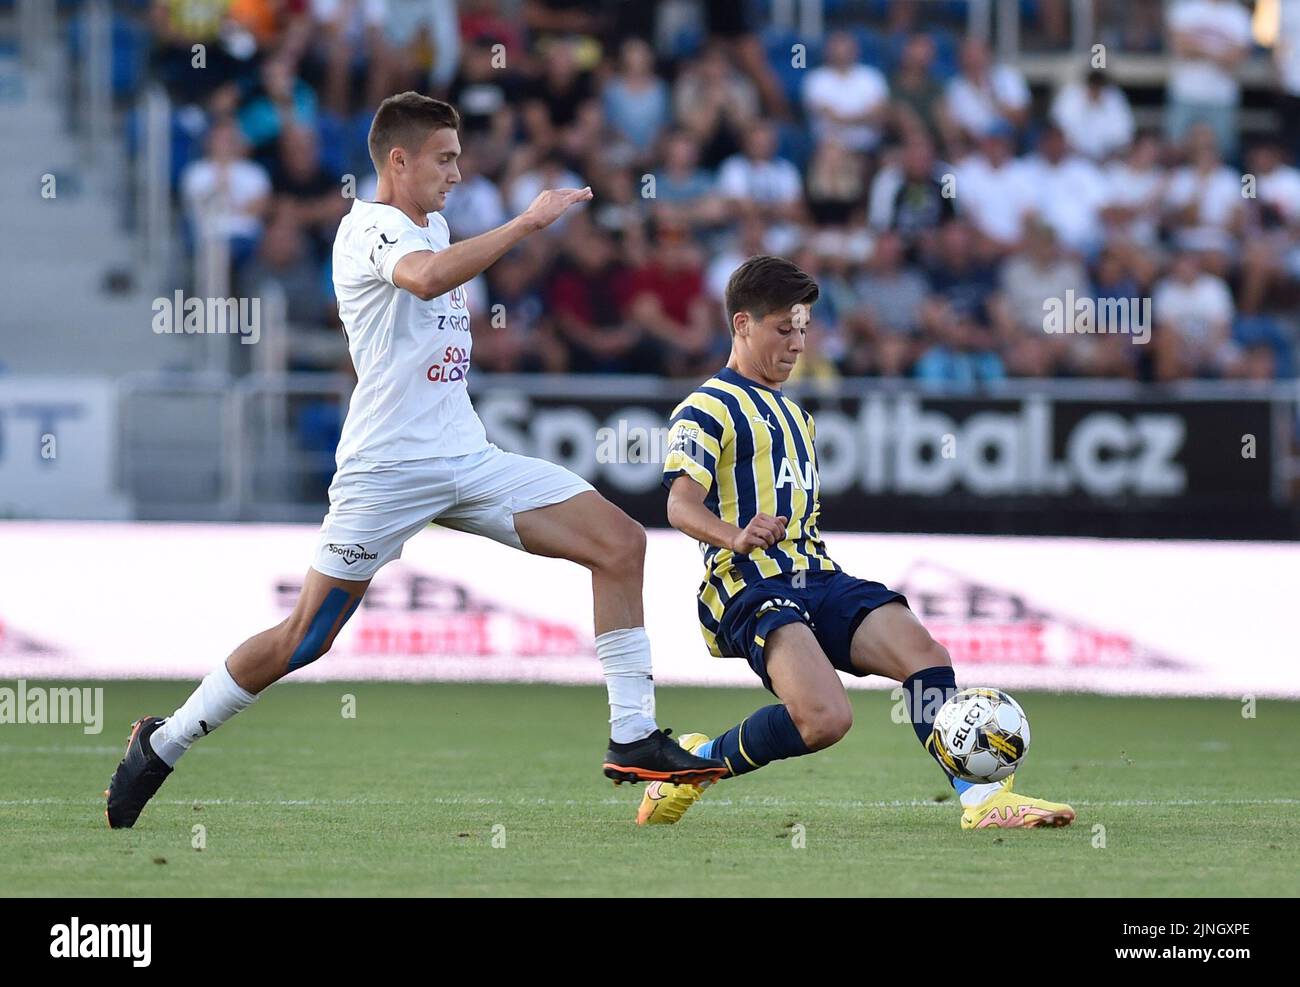 Uherske Hradiste, Czech Republic. 11th Aug, 2022. From left Vladislav Levin of Slovacko and Arda Guler of Fenerbahce in action during the European Football League third qualifying round return match: FC Slovacko vs Fenerbahce Istanbul in Uherske Hradiste, Czech Republic, August 11, 2022. Credit: Dalibor Gluck/CTK Photo/Alamy Live News Stock Photo